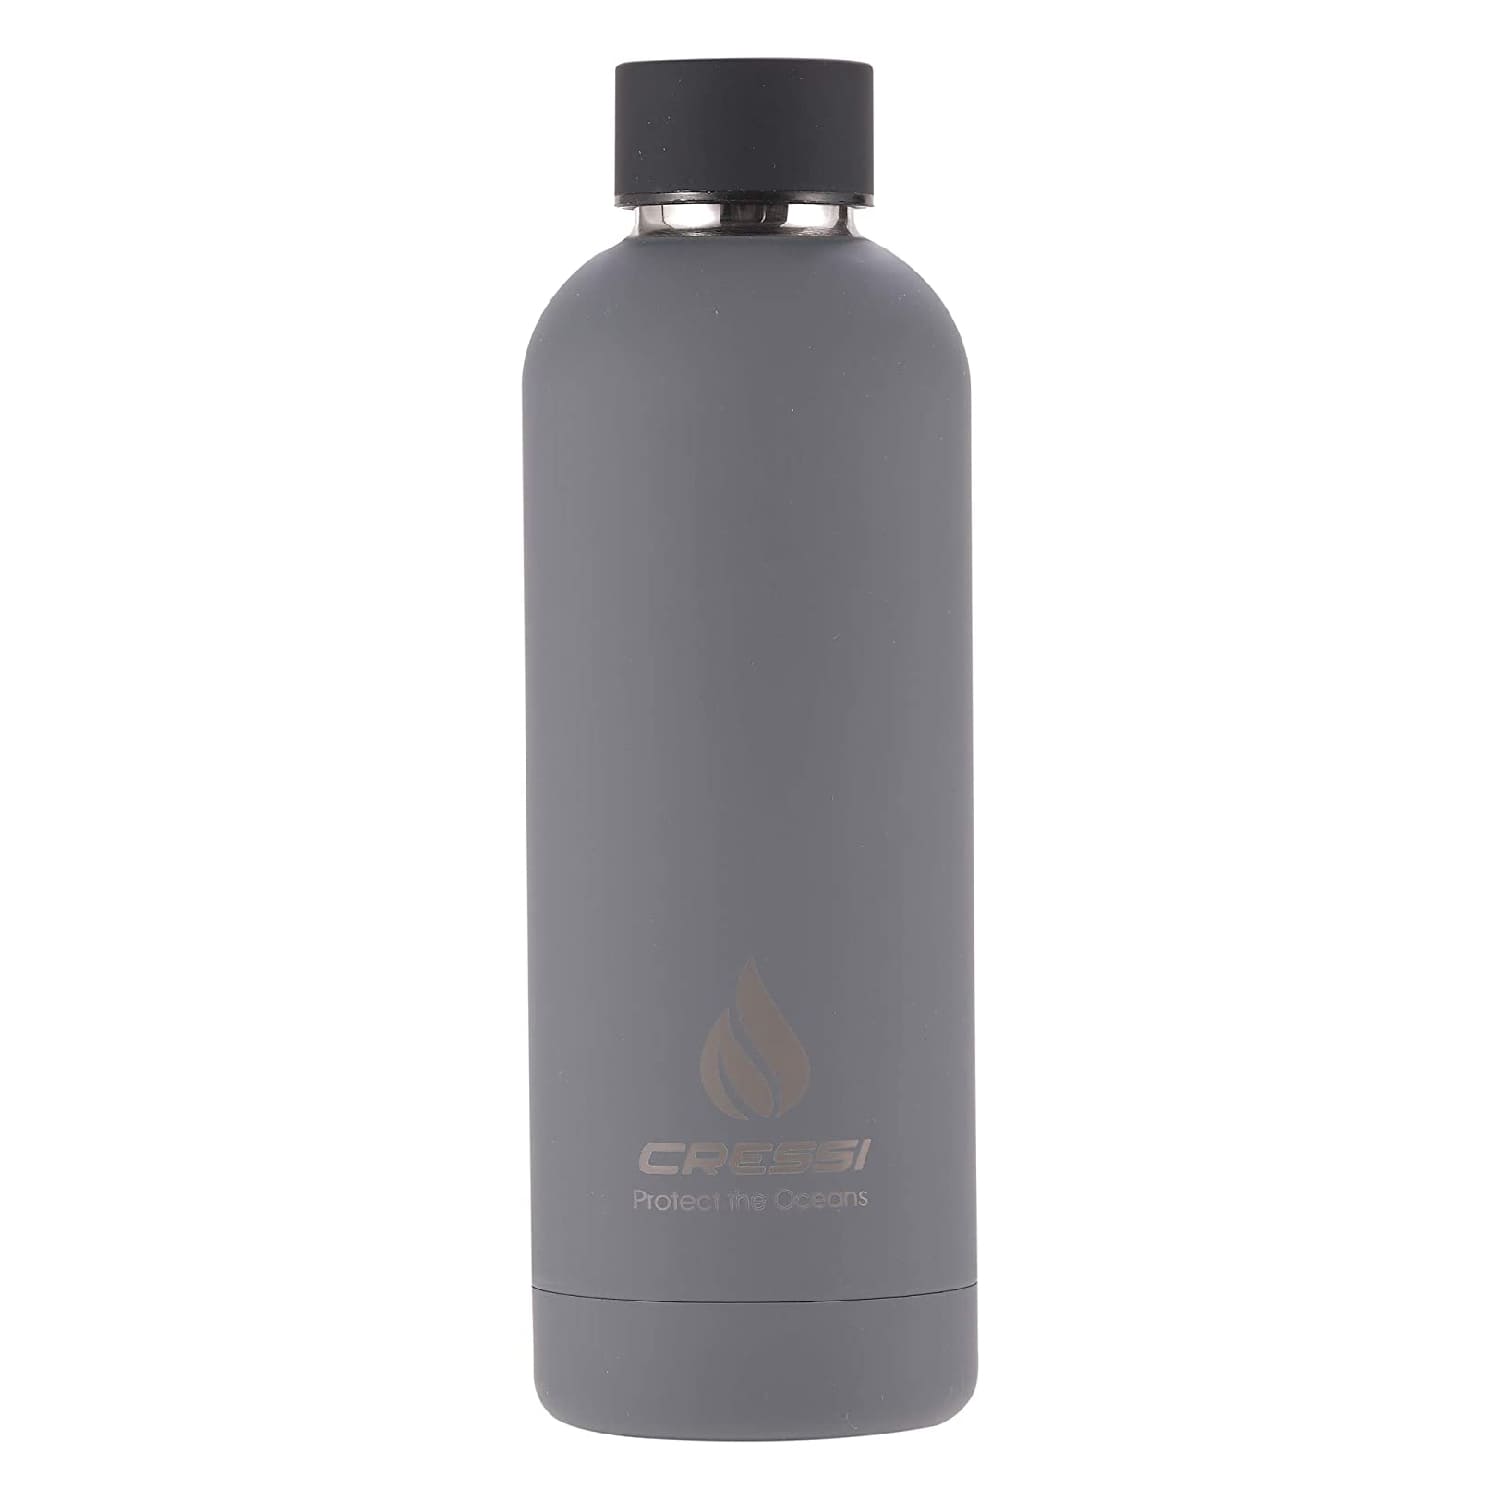 RUBBER COATED THERMAL FLASK 500ml GREY BLACK (CHARCOAL)_ 1